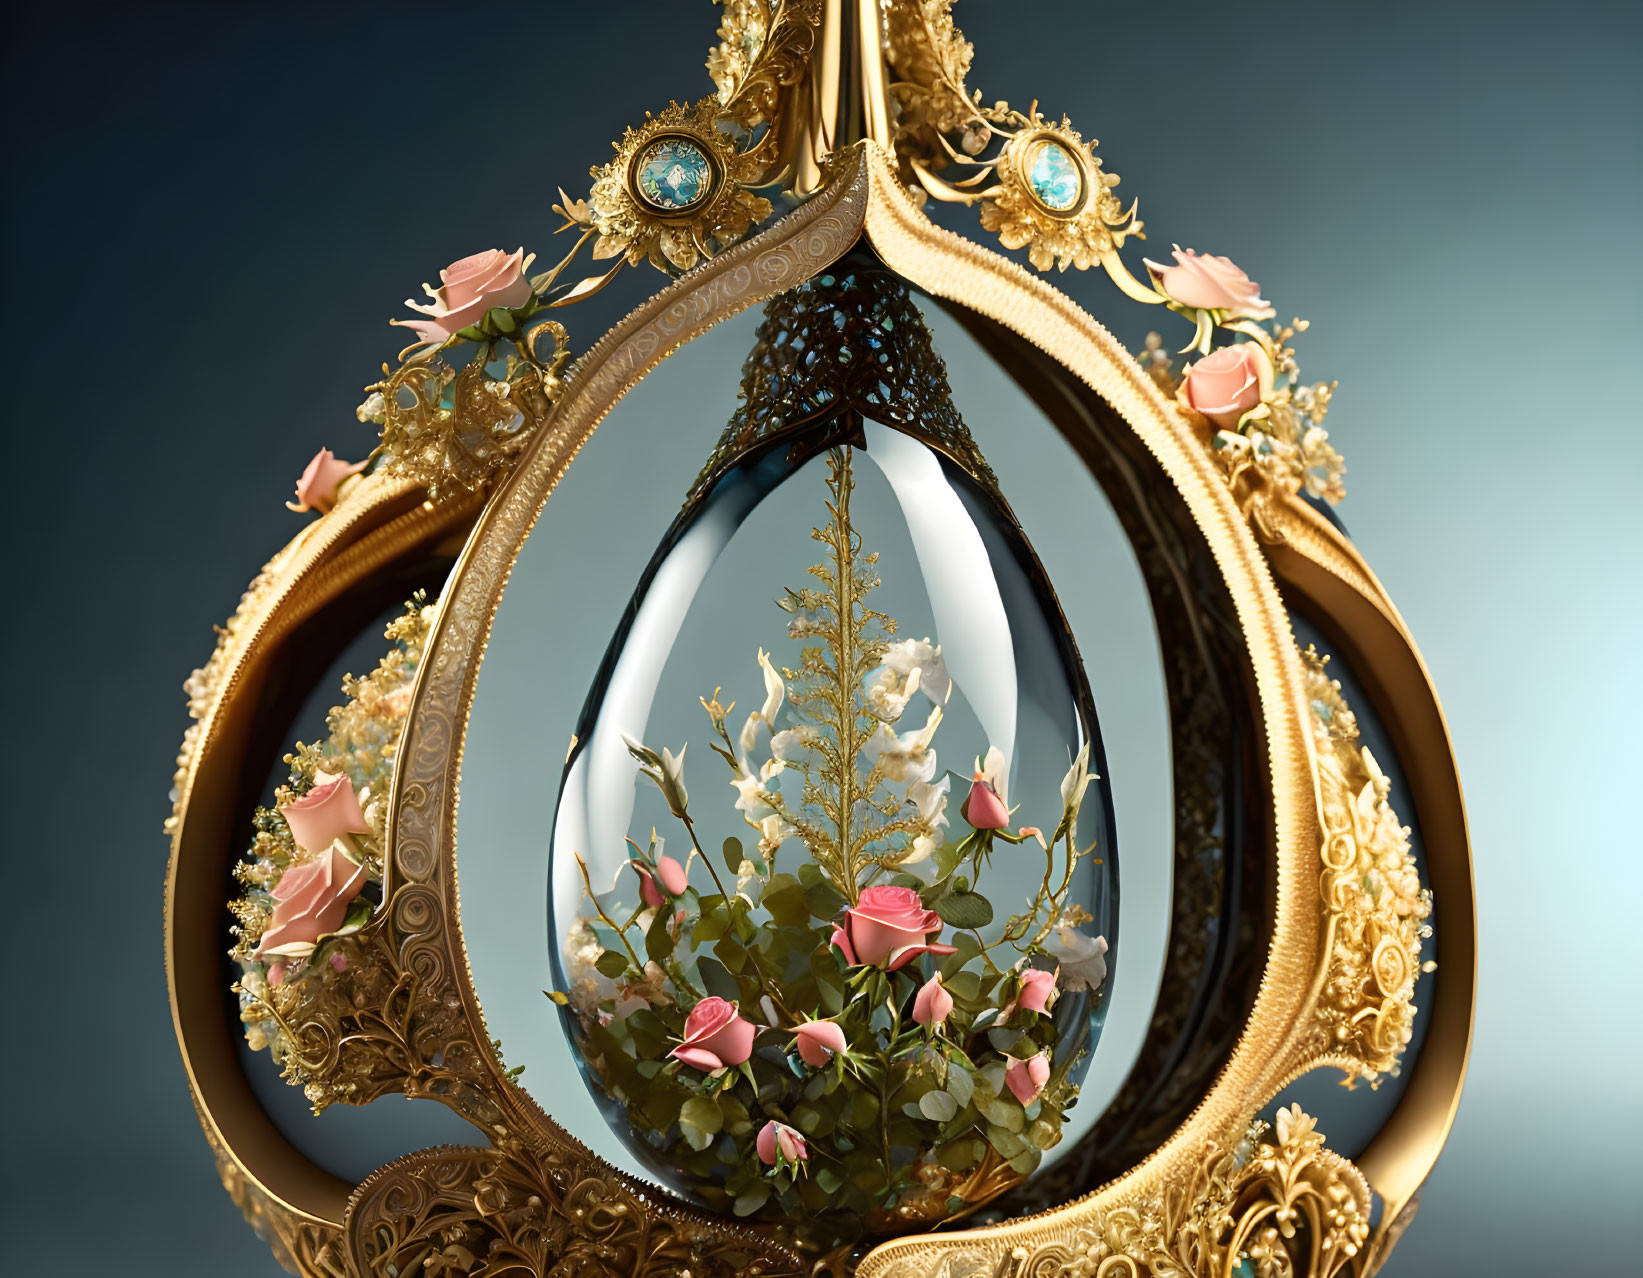 Golden Frame with Turquoise Accents Surrounding White Blossoms and Pink Roses